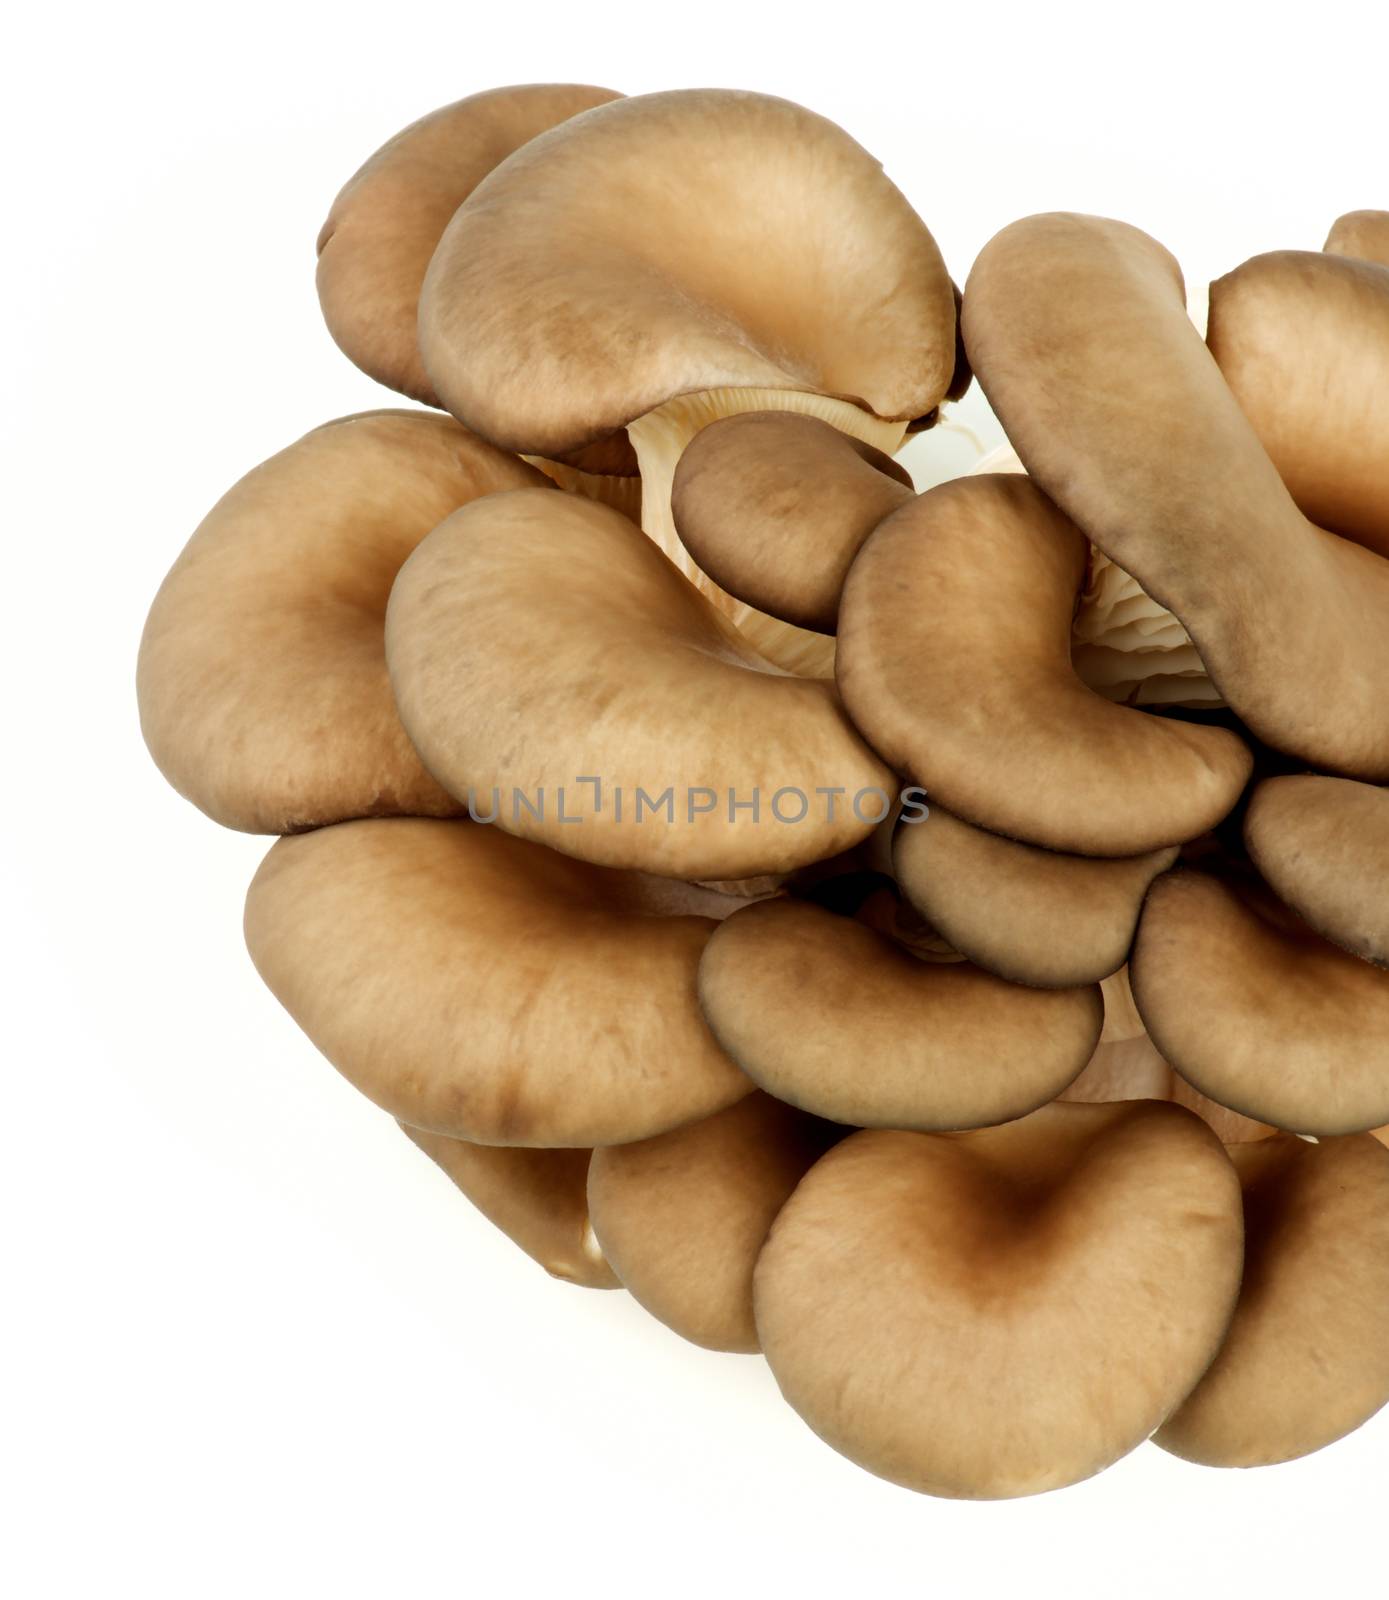 Big Heap of Raw Oyster Mushrooms Cross Section on White background